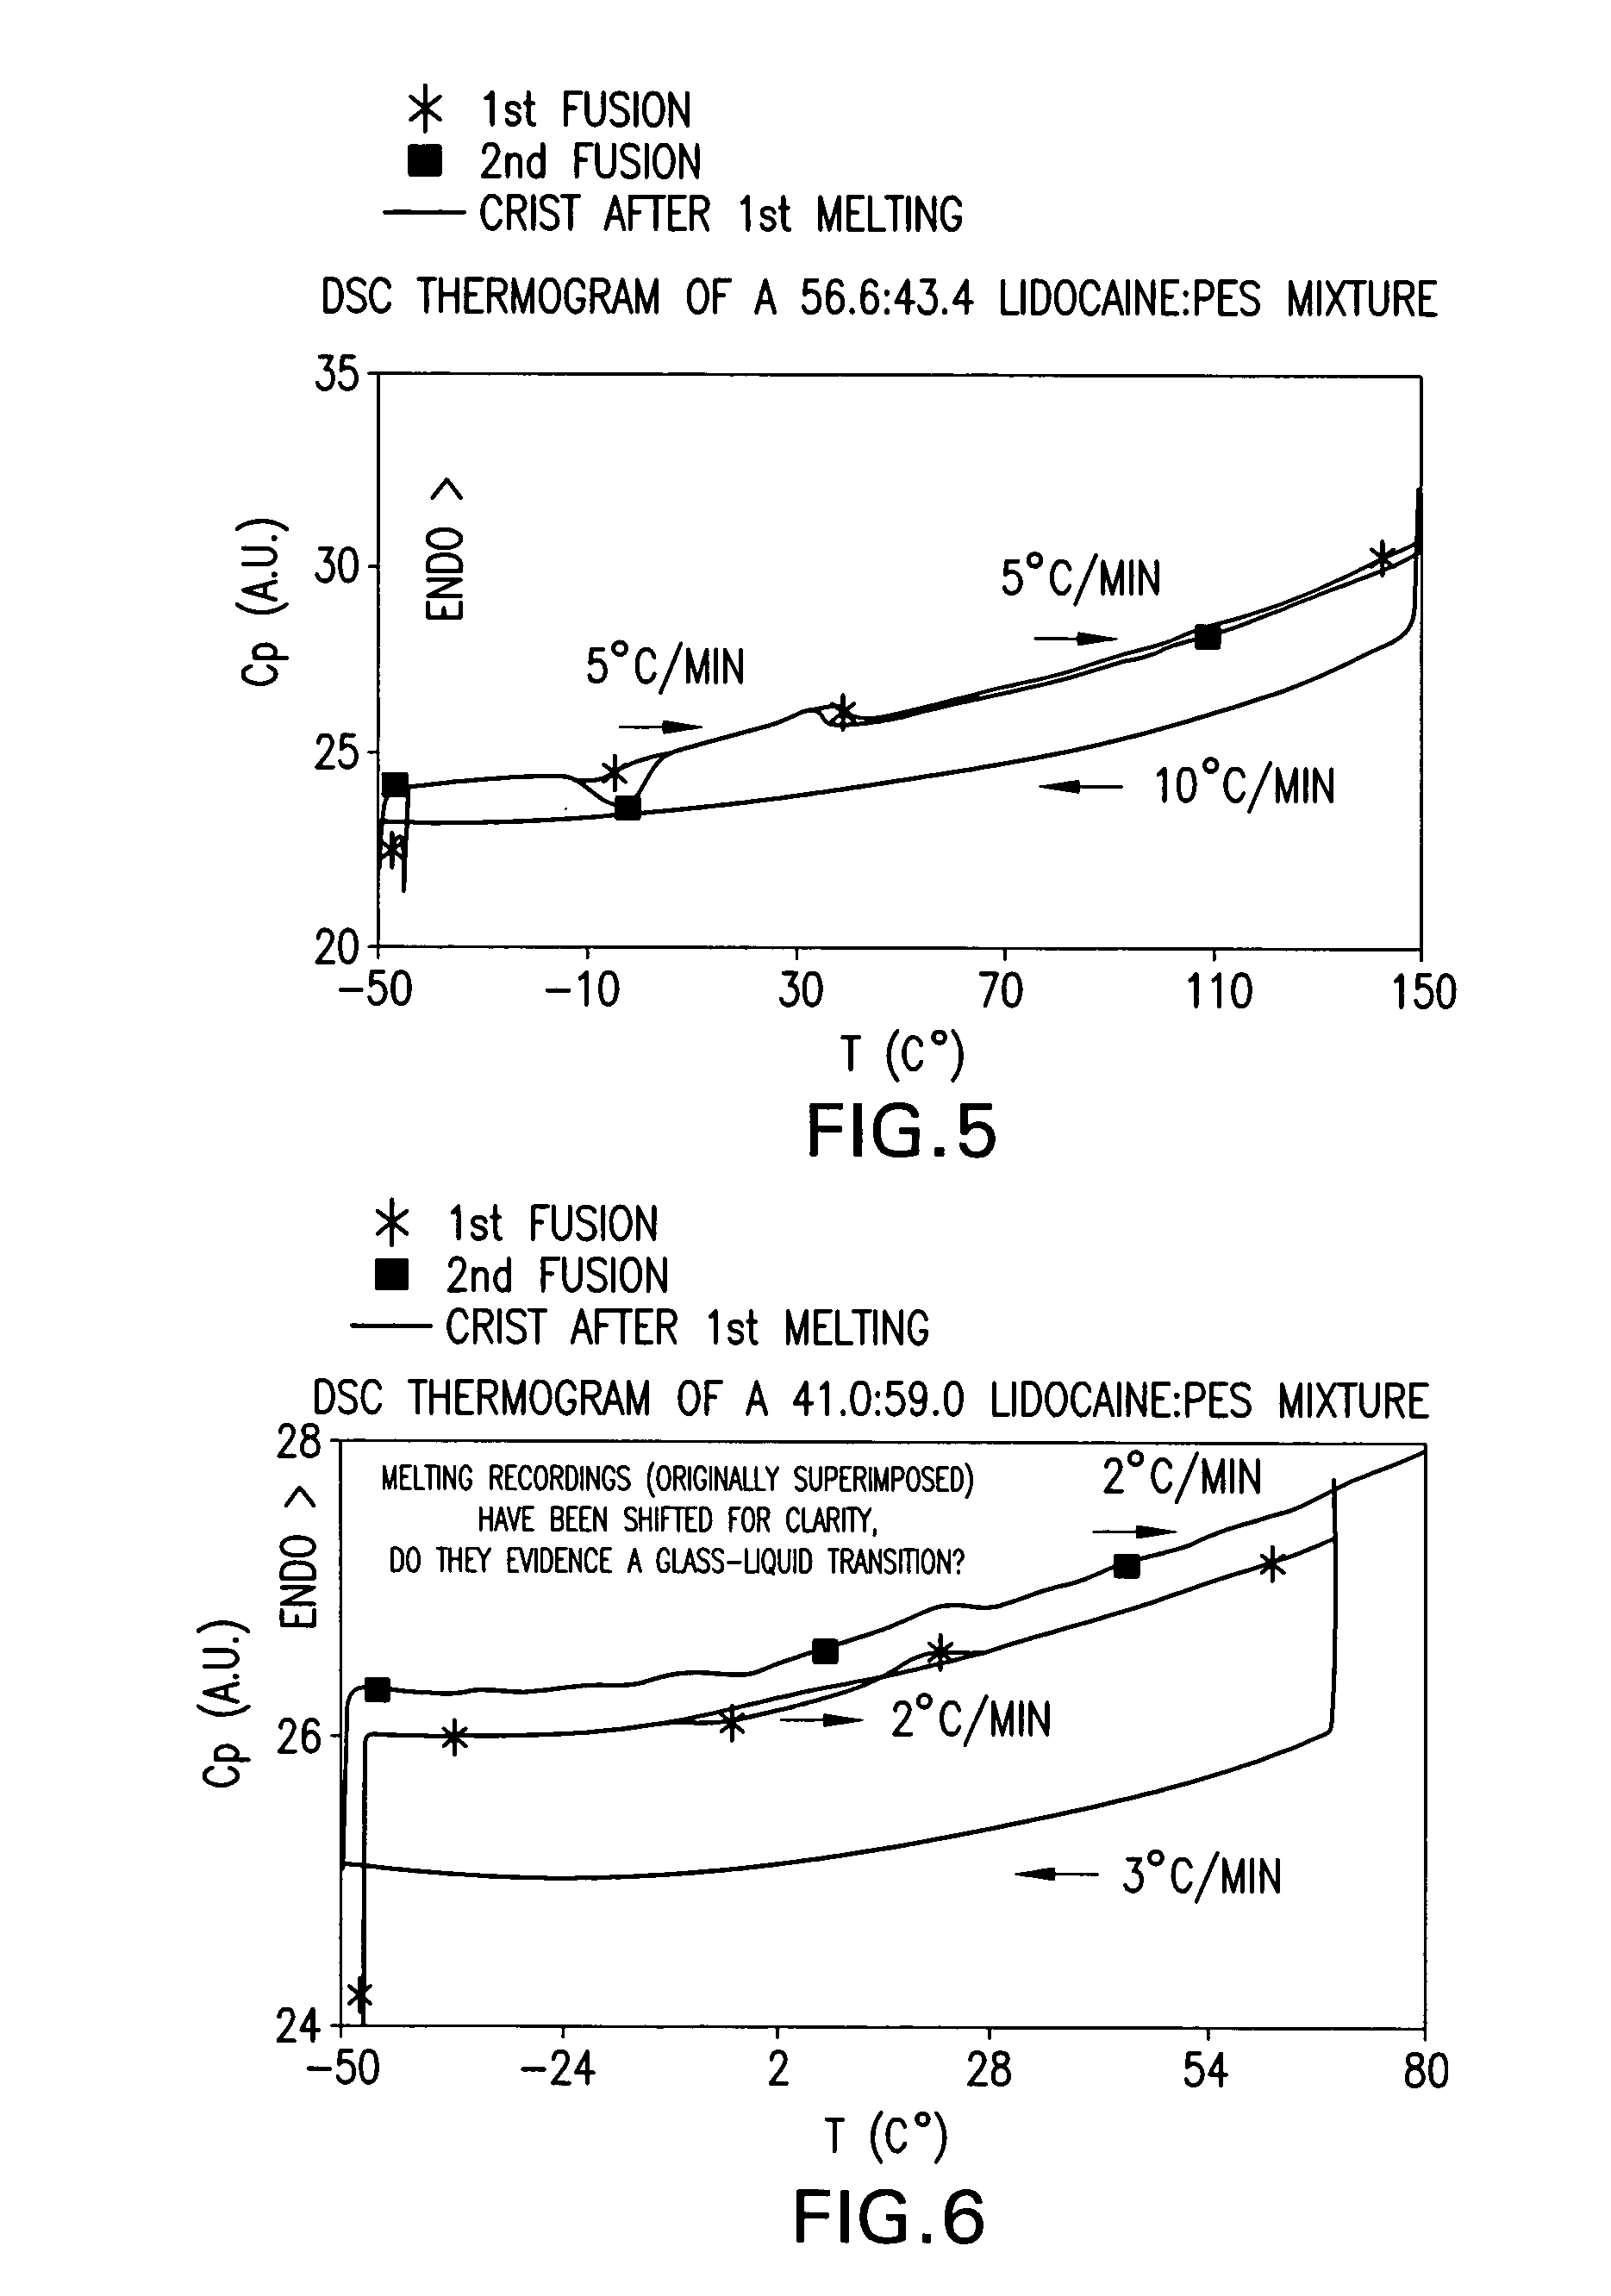 Pharmaceutical compositions with melting point depressant agents and method of making same